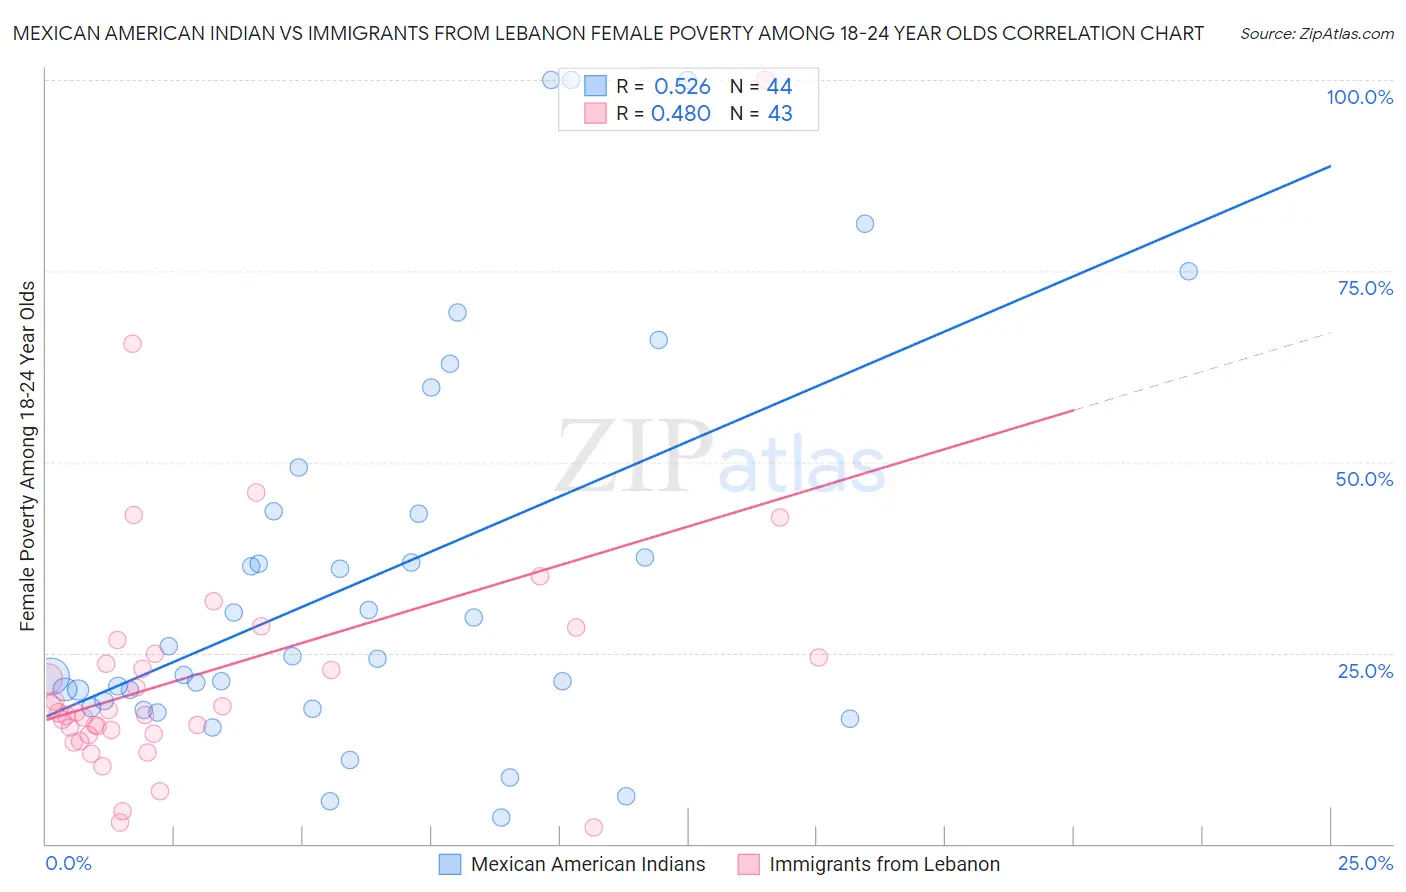 Mexican American Indian vs Immigrants from Lebanon Female Poverty Among 18-24 Year Olds